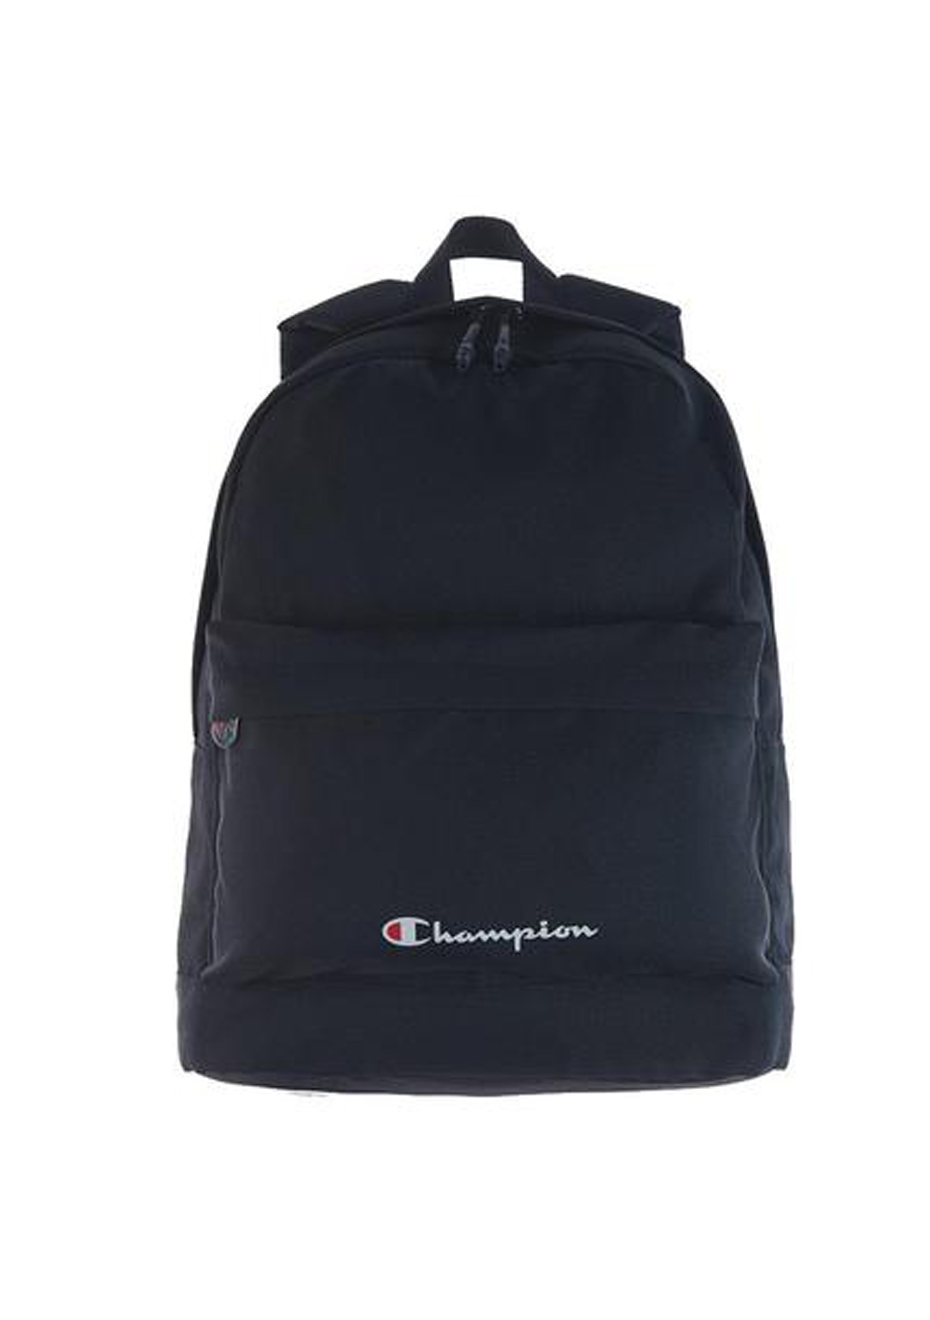 champion backpack nz